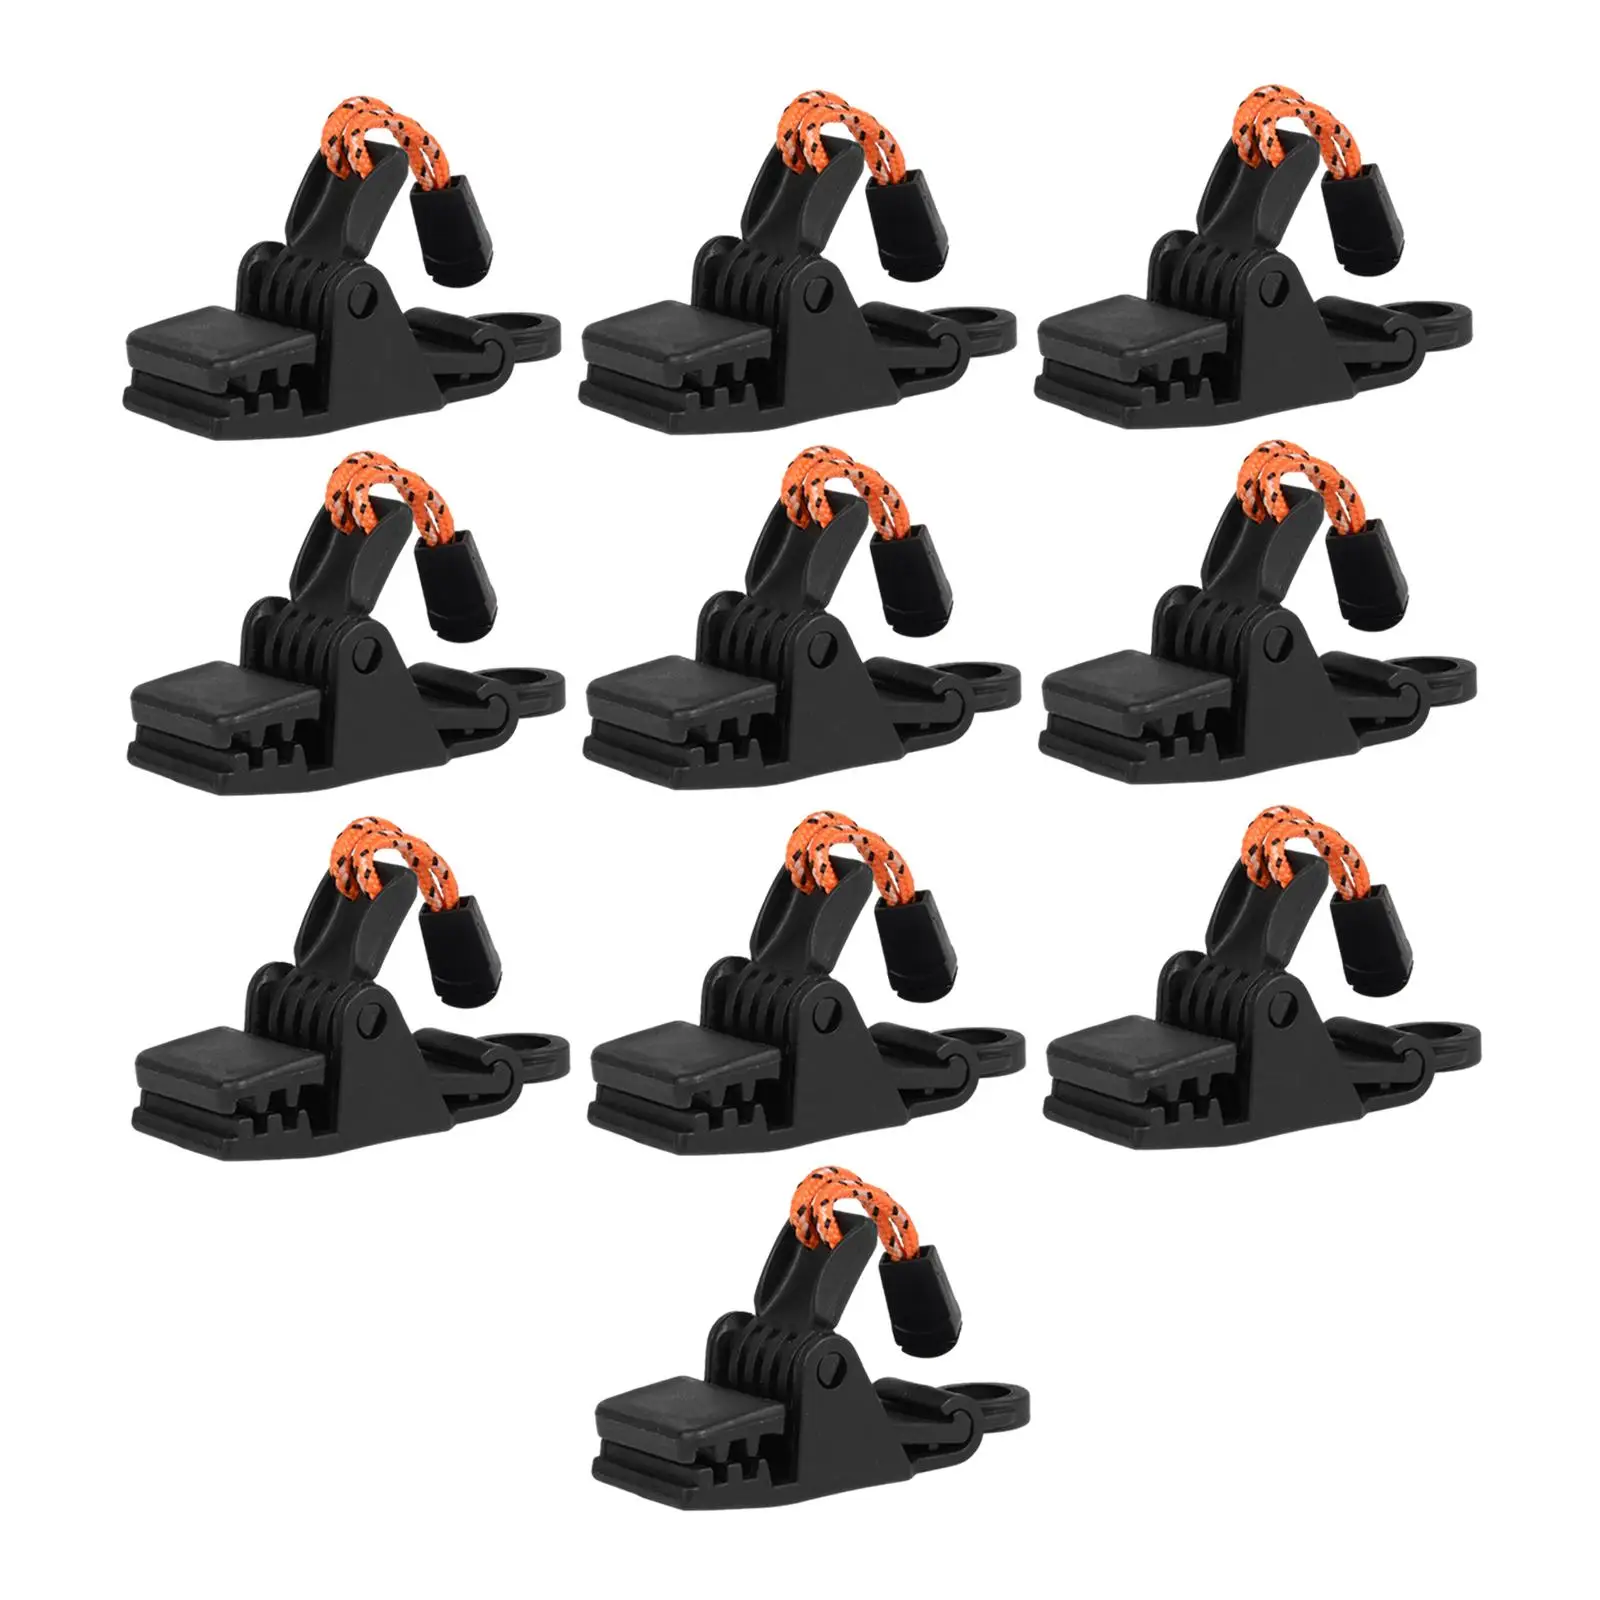 10Pcs Tarp Clips Heavy Duty Sturdy Durable Awning Clamps Canopy for Canopies Swimming Pool Covers Backpacking Hiking Boat Cover